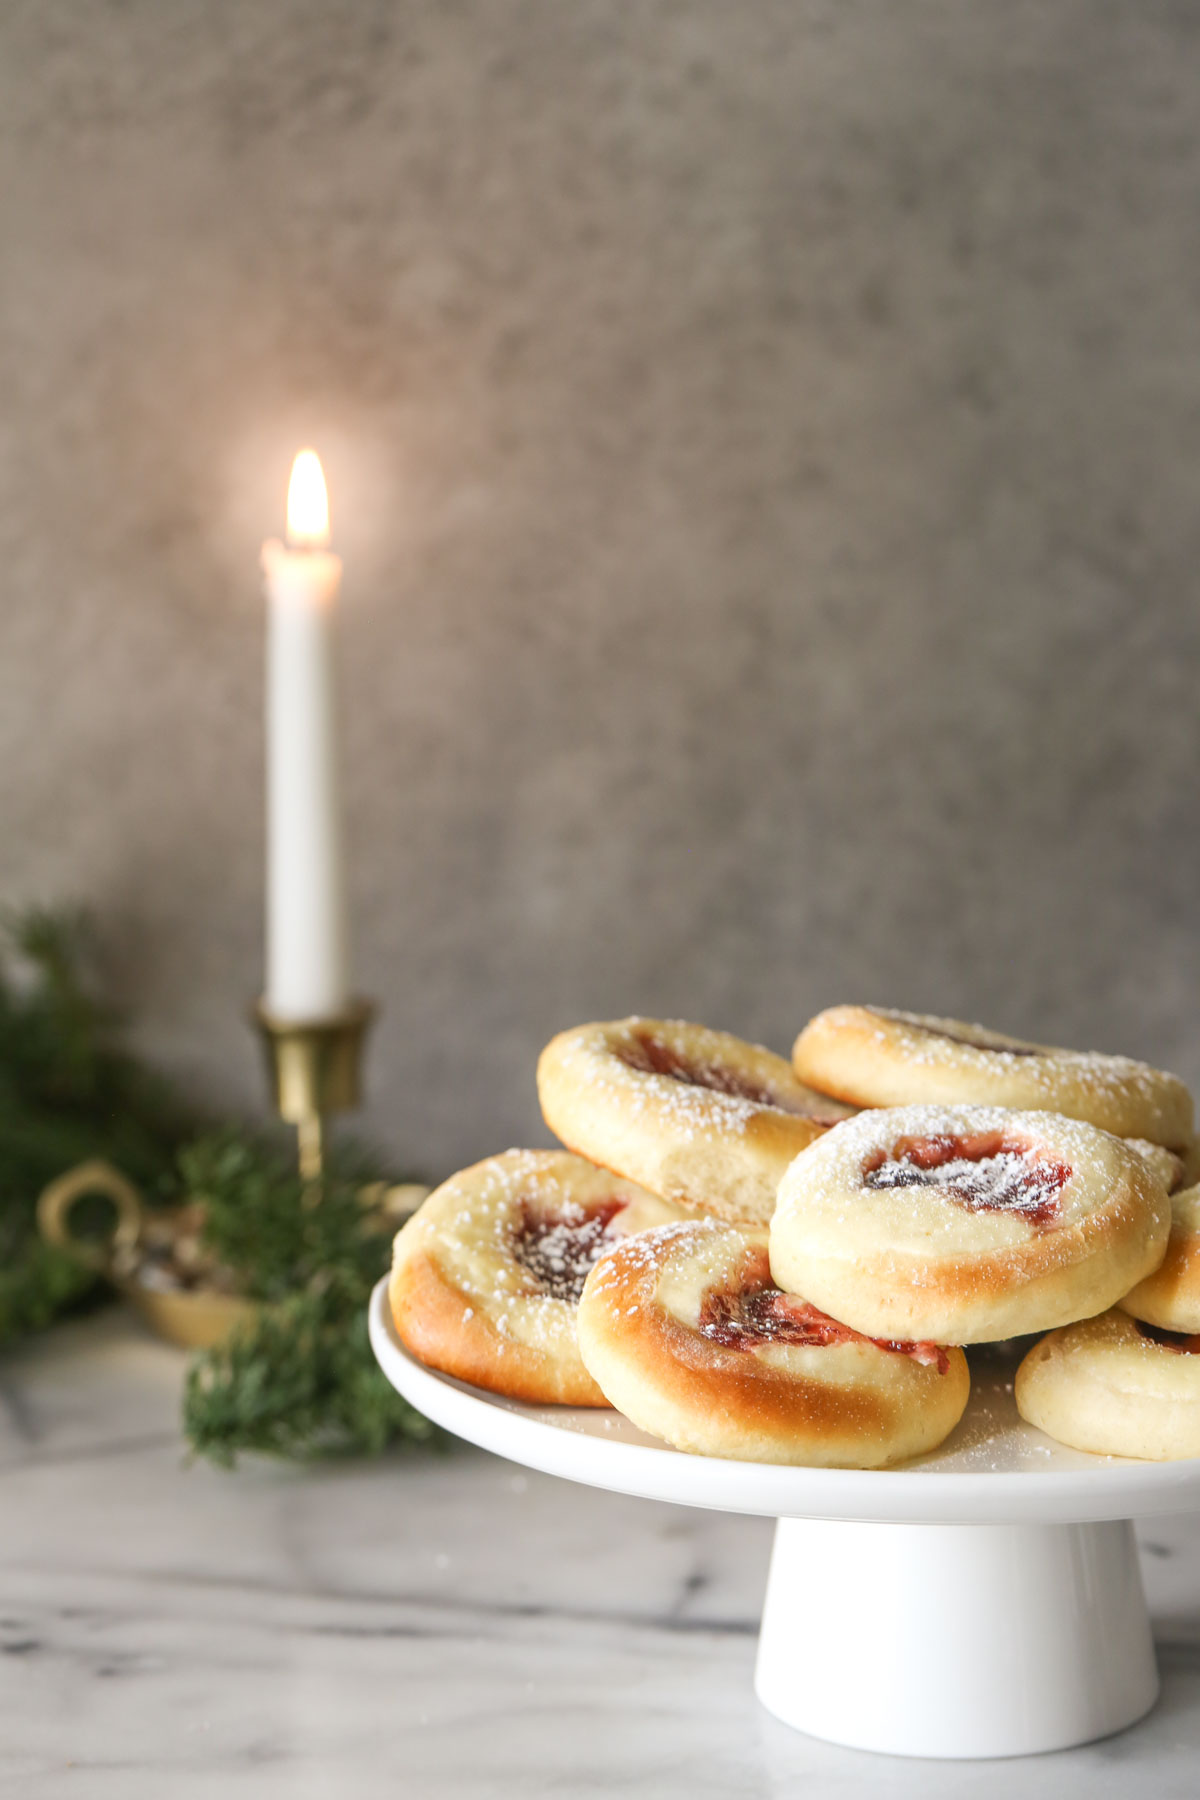 Raspberry Cream Cheese Kolaches arranged on a cake stand, with a candle burning in the background.  